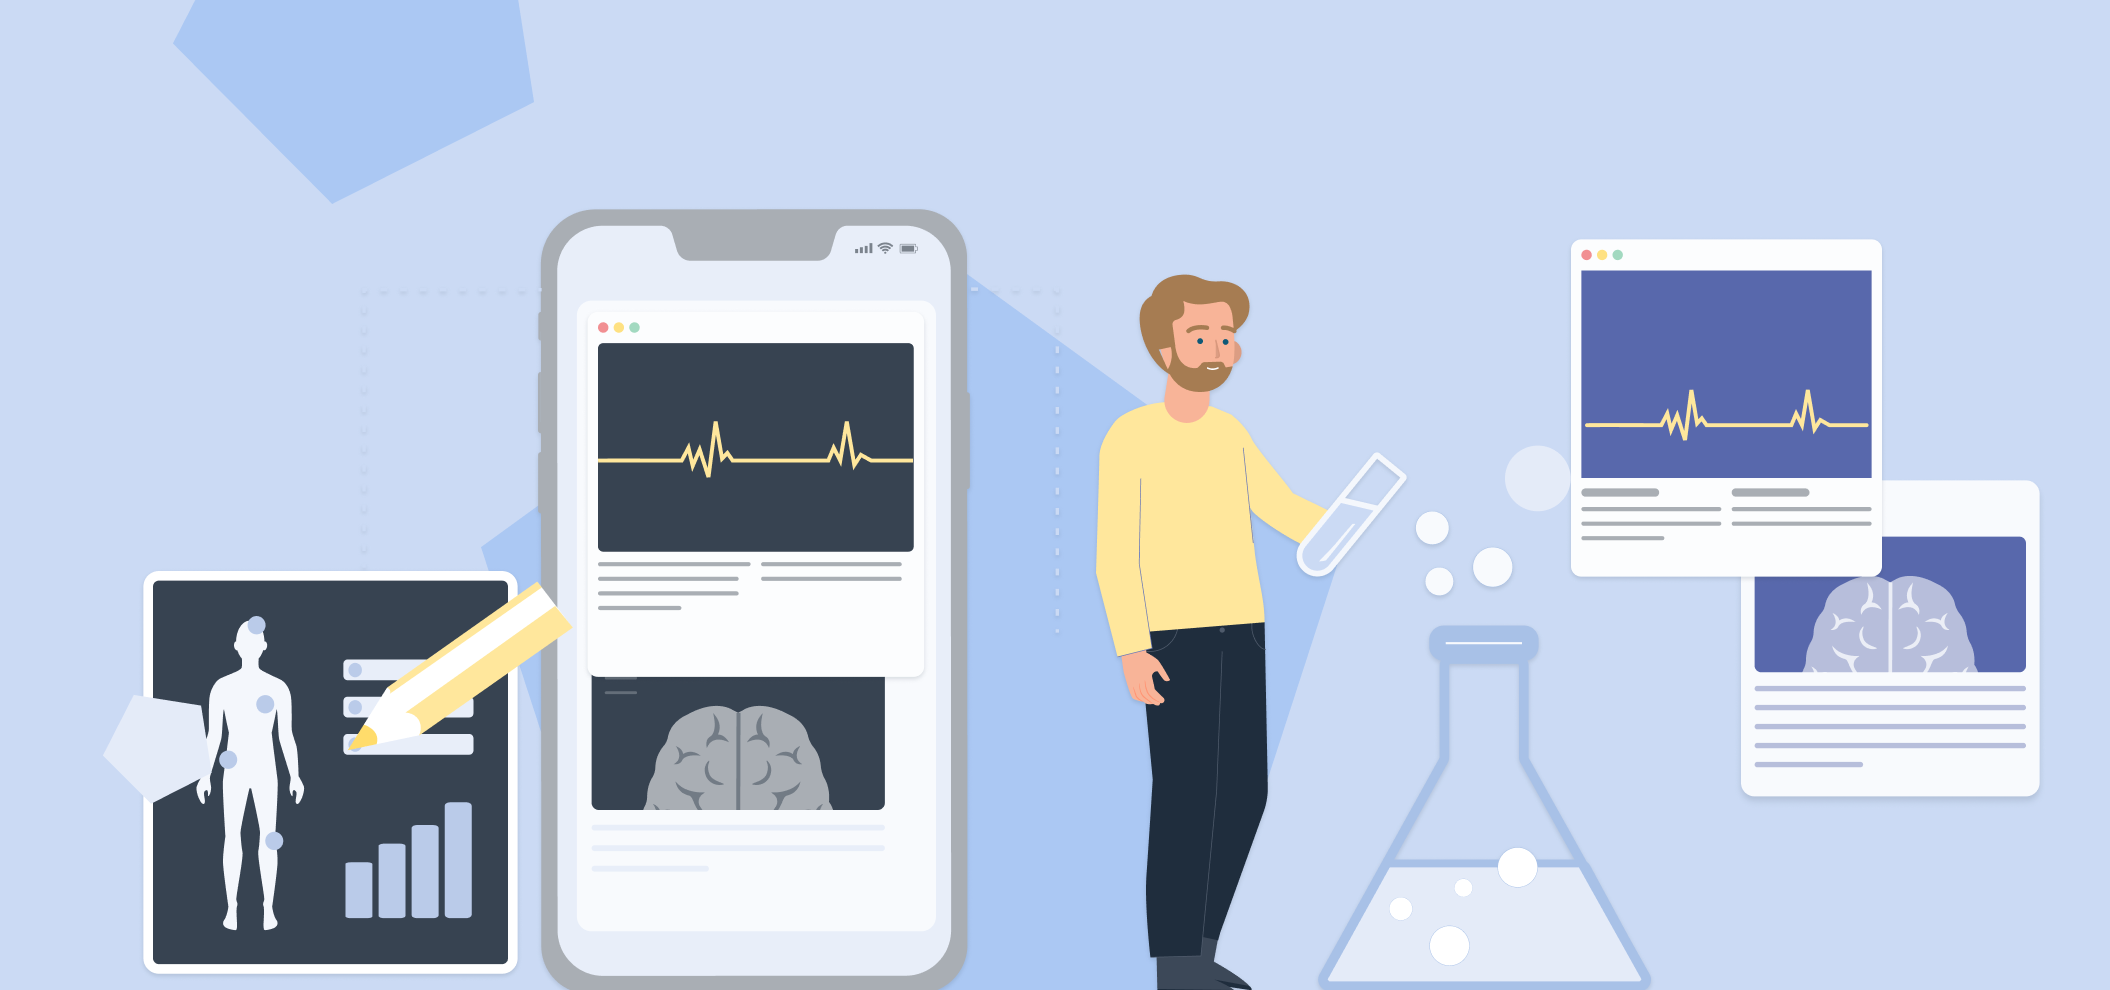 Leveraging Artificial Intelligence for QA and Testing Digital Health Products